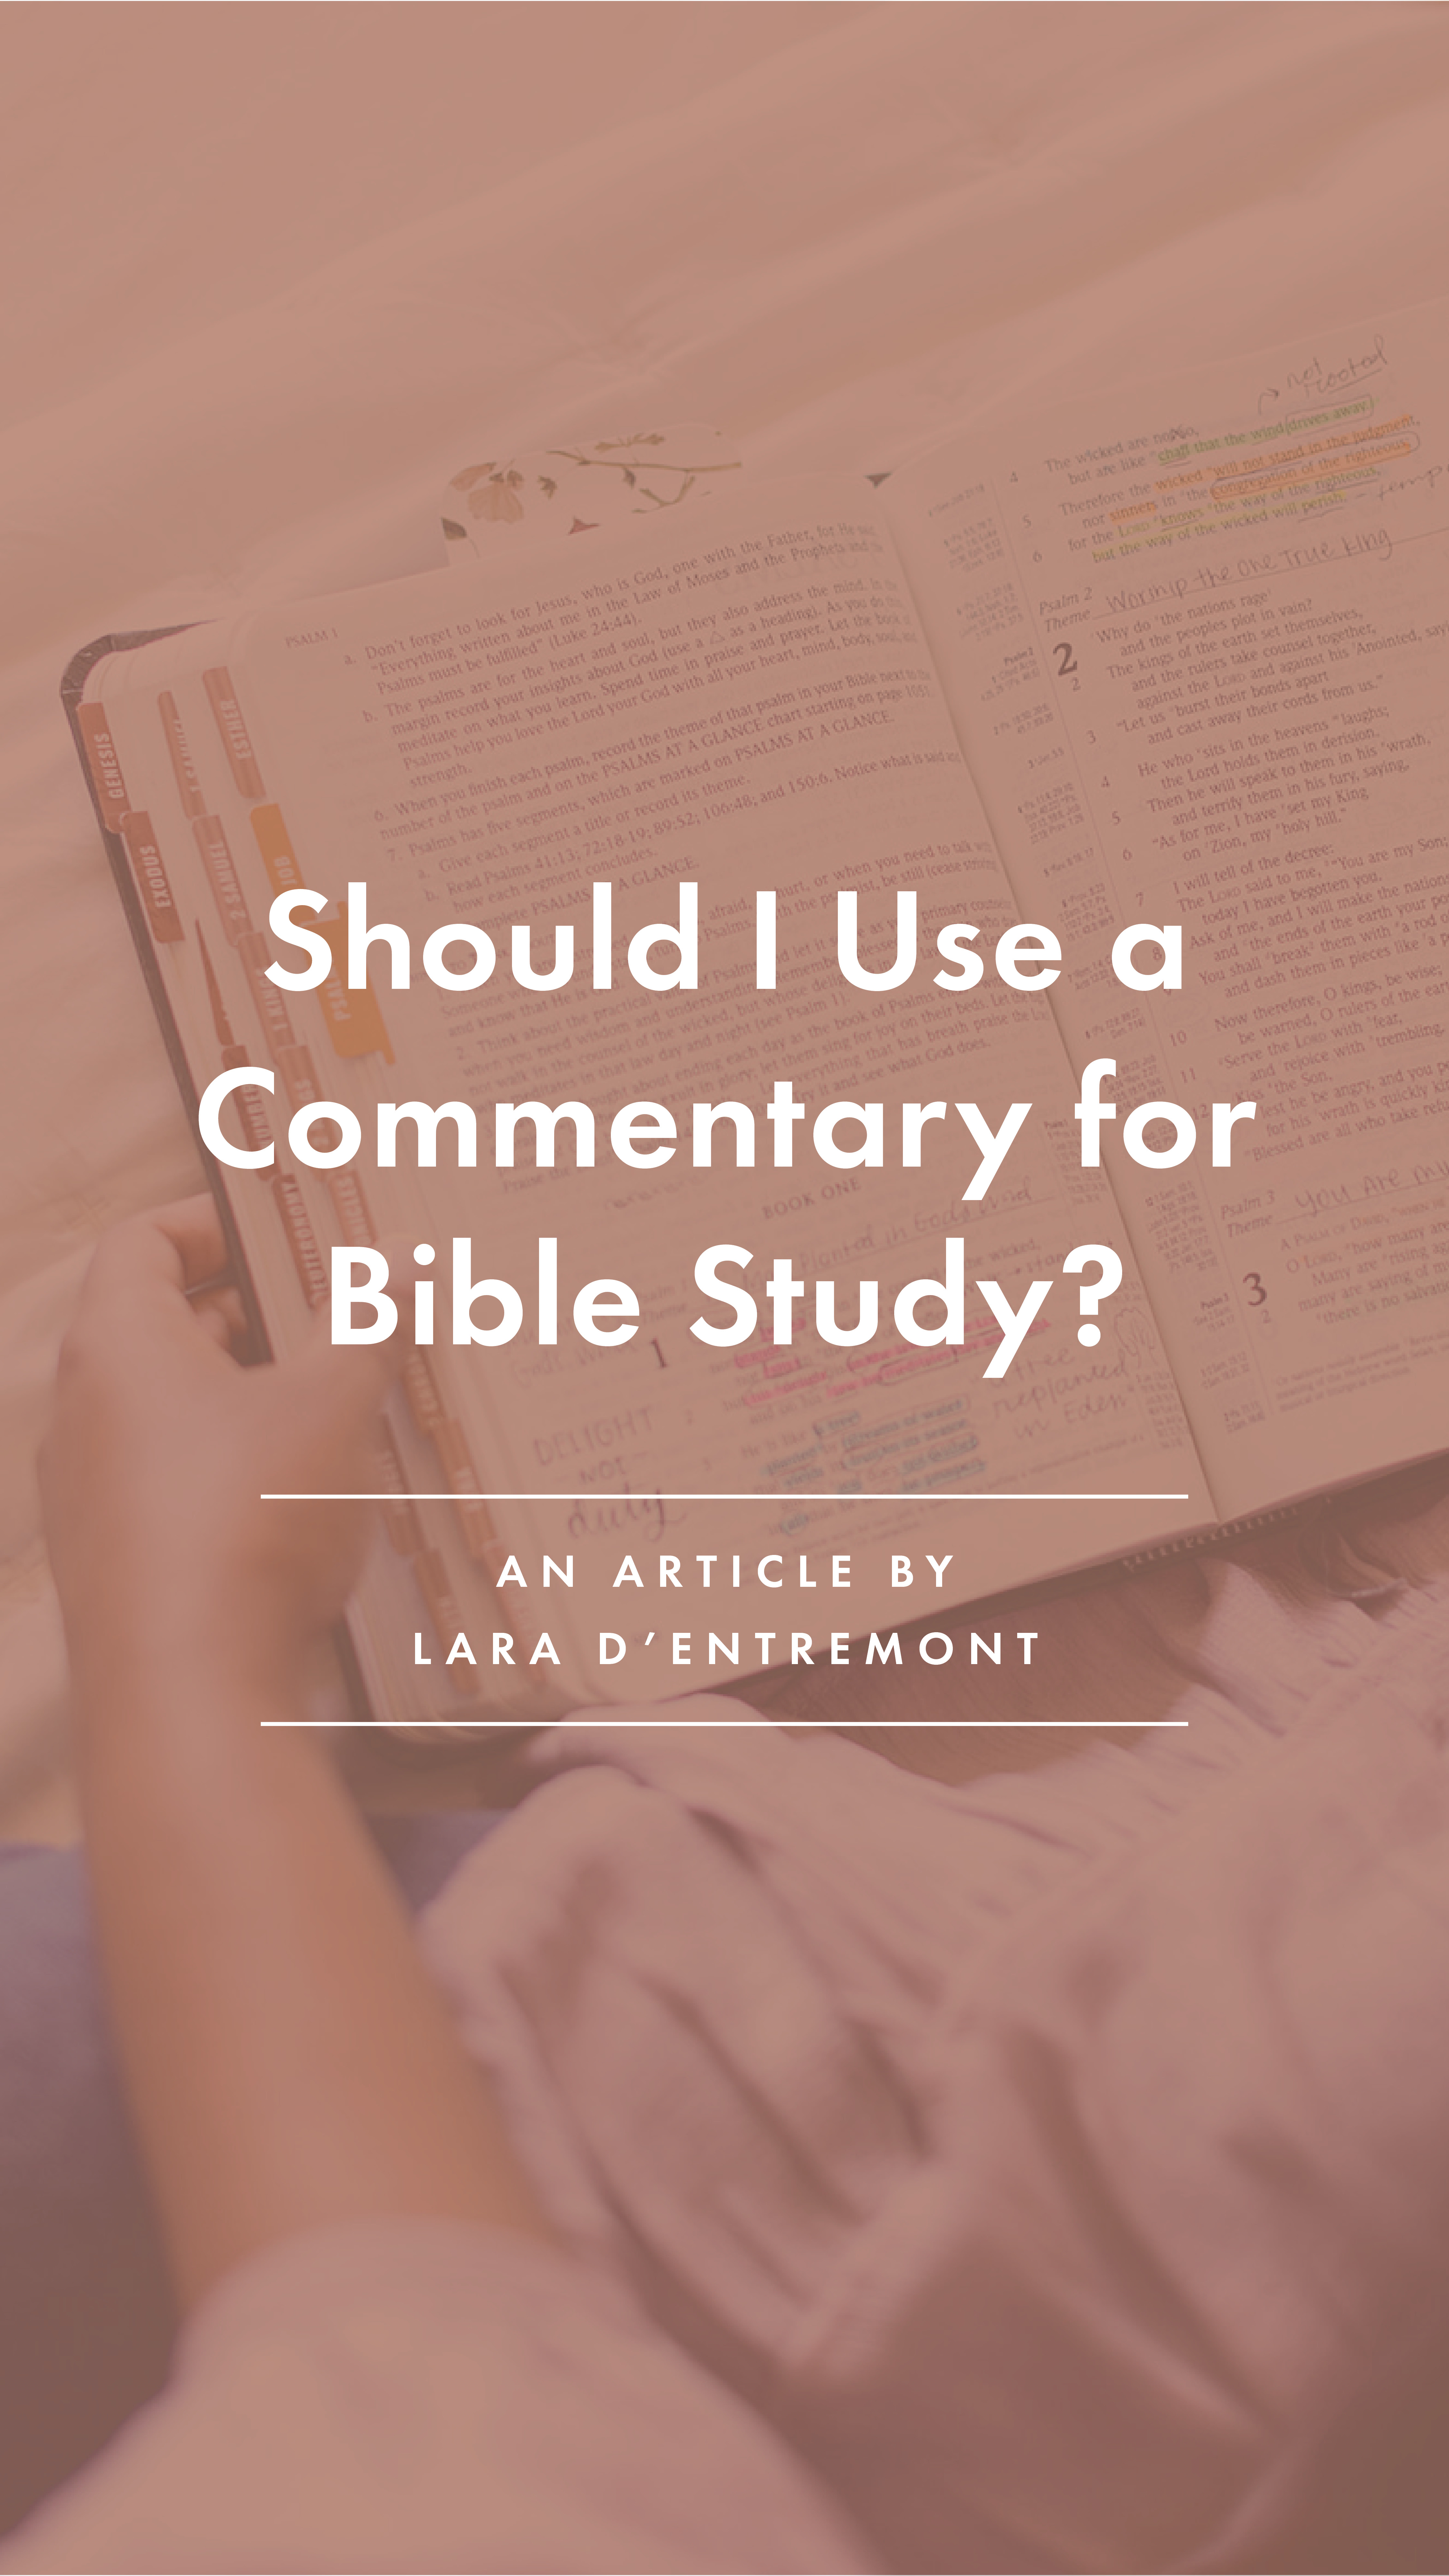 Should I Use a Commentary - an article by Lara d'Entremont - story